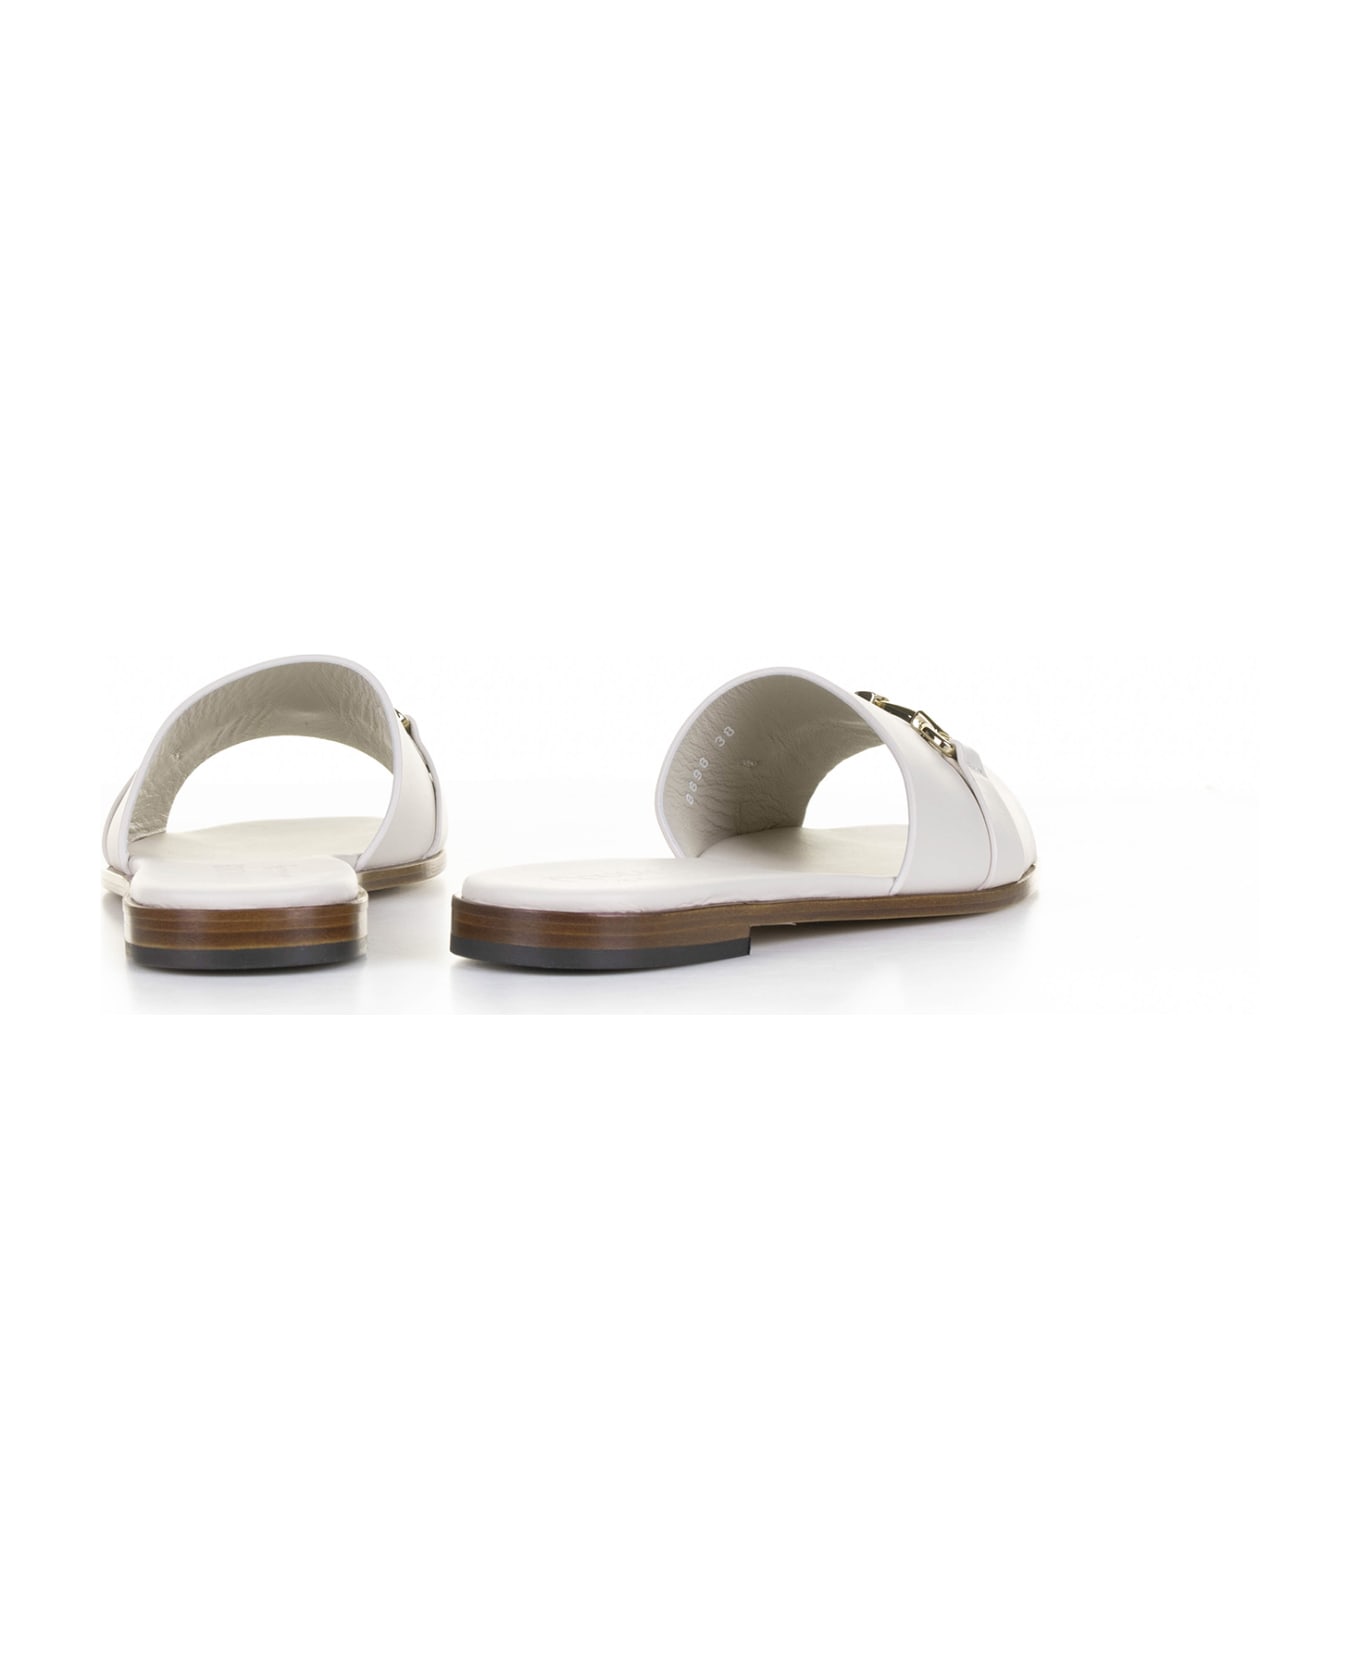 Doucal's White Leather Slipper With Horsebit - GESSO サンダル